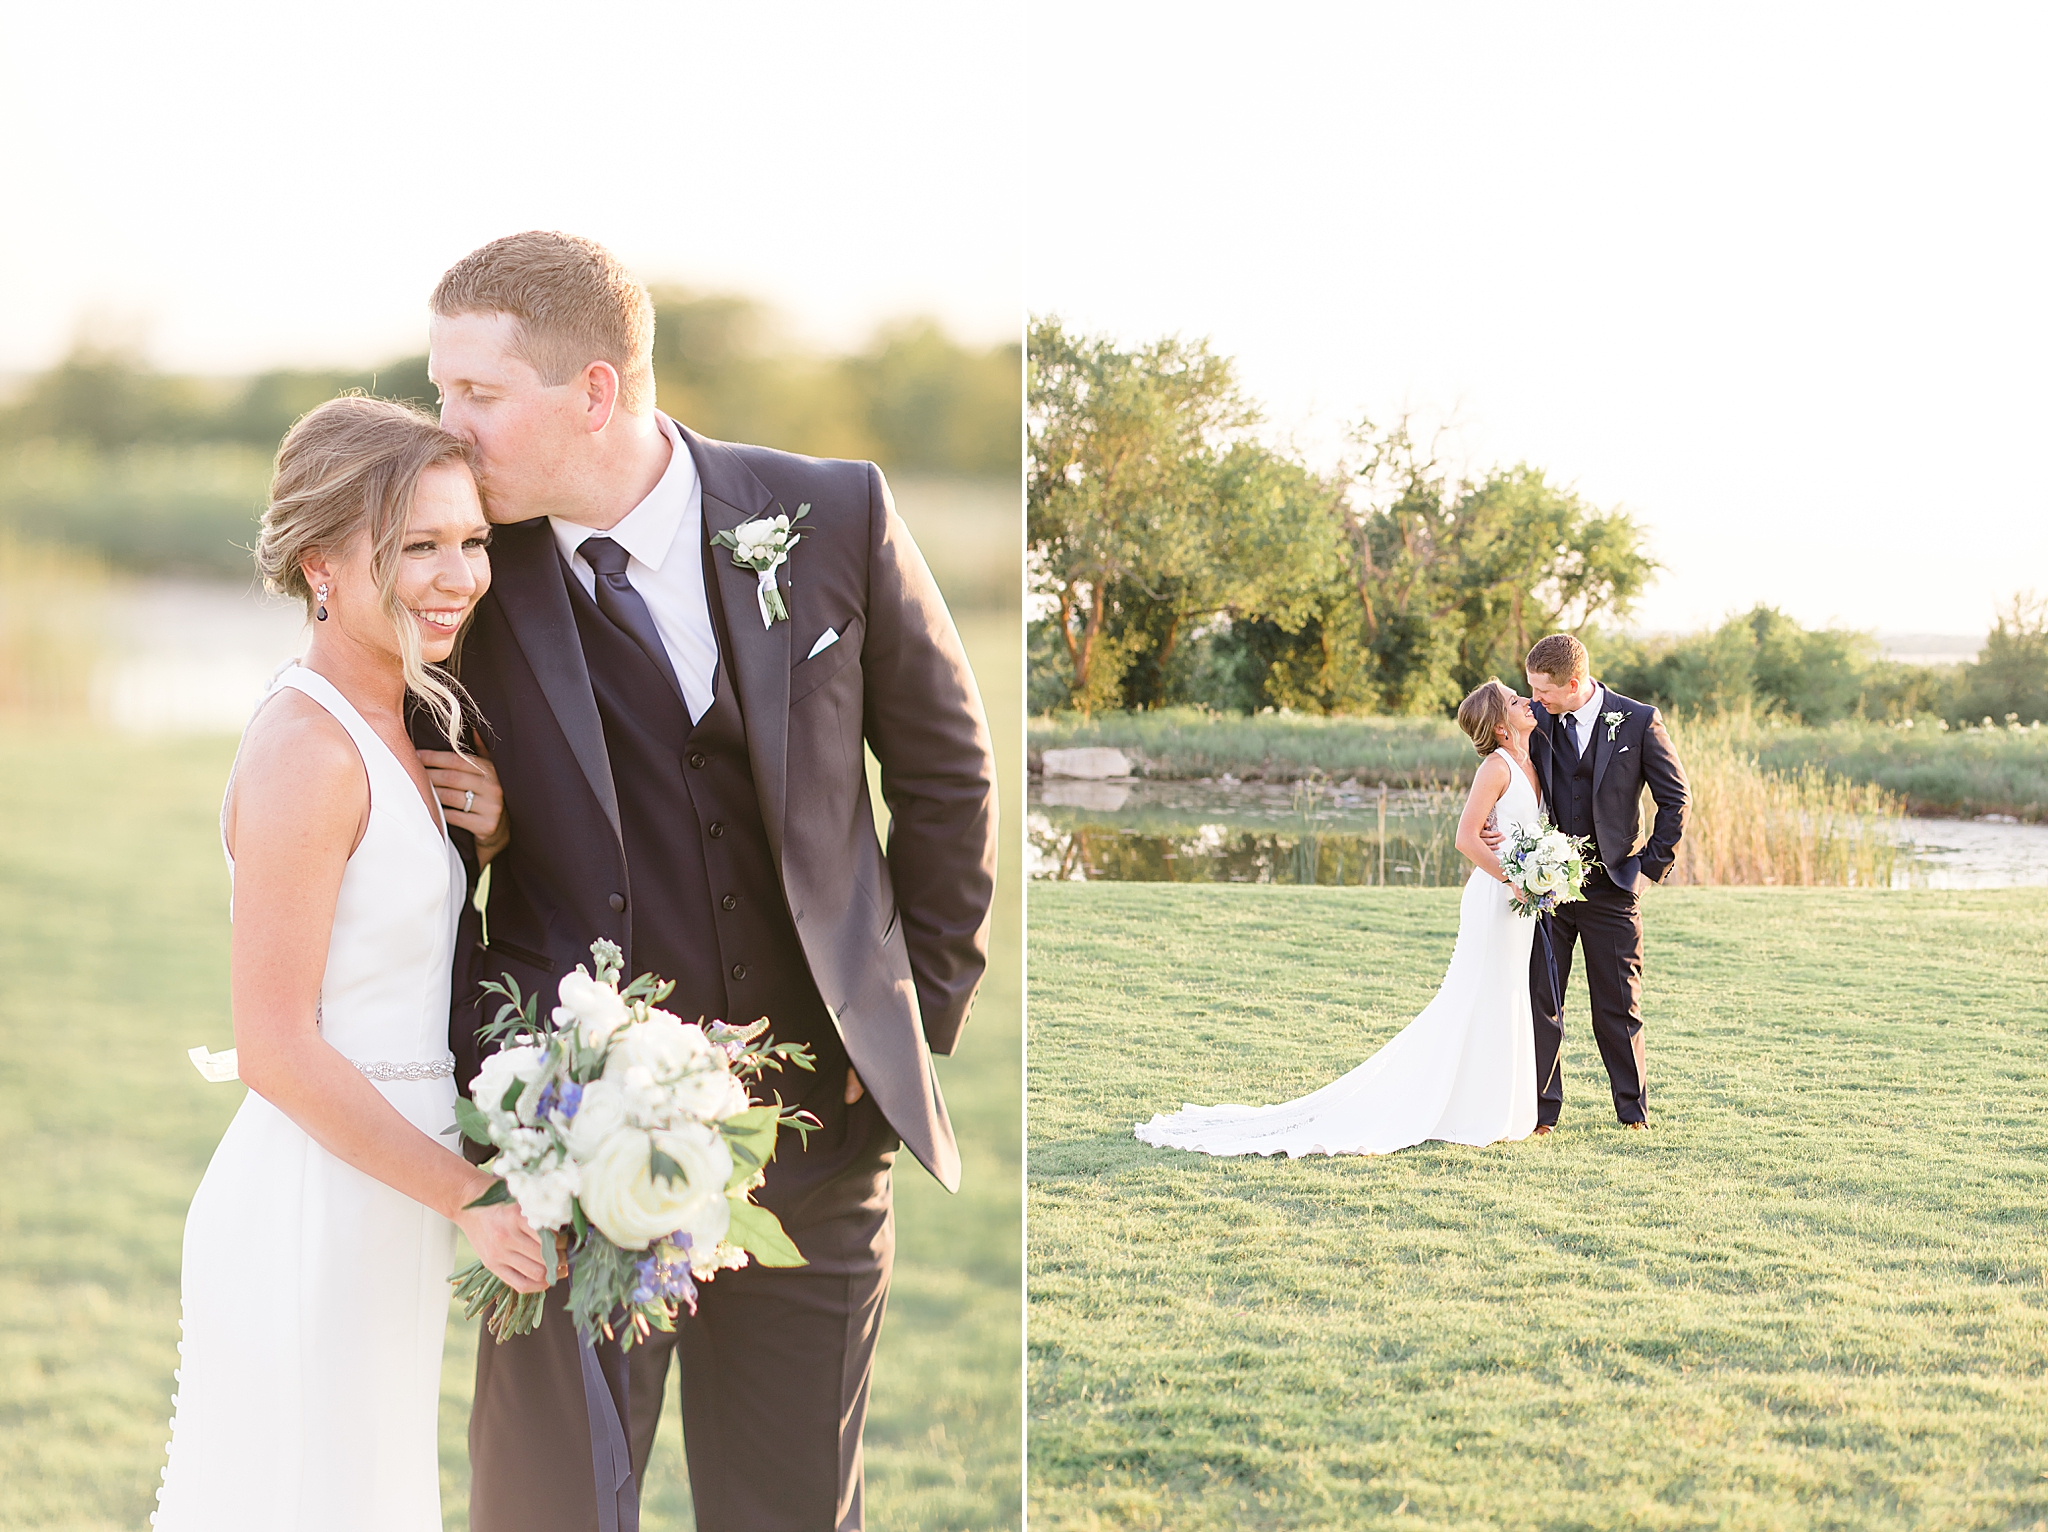 The Nest at Ruth Farms wedding day photographed by Courtney Bosworth Photography